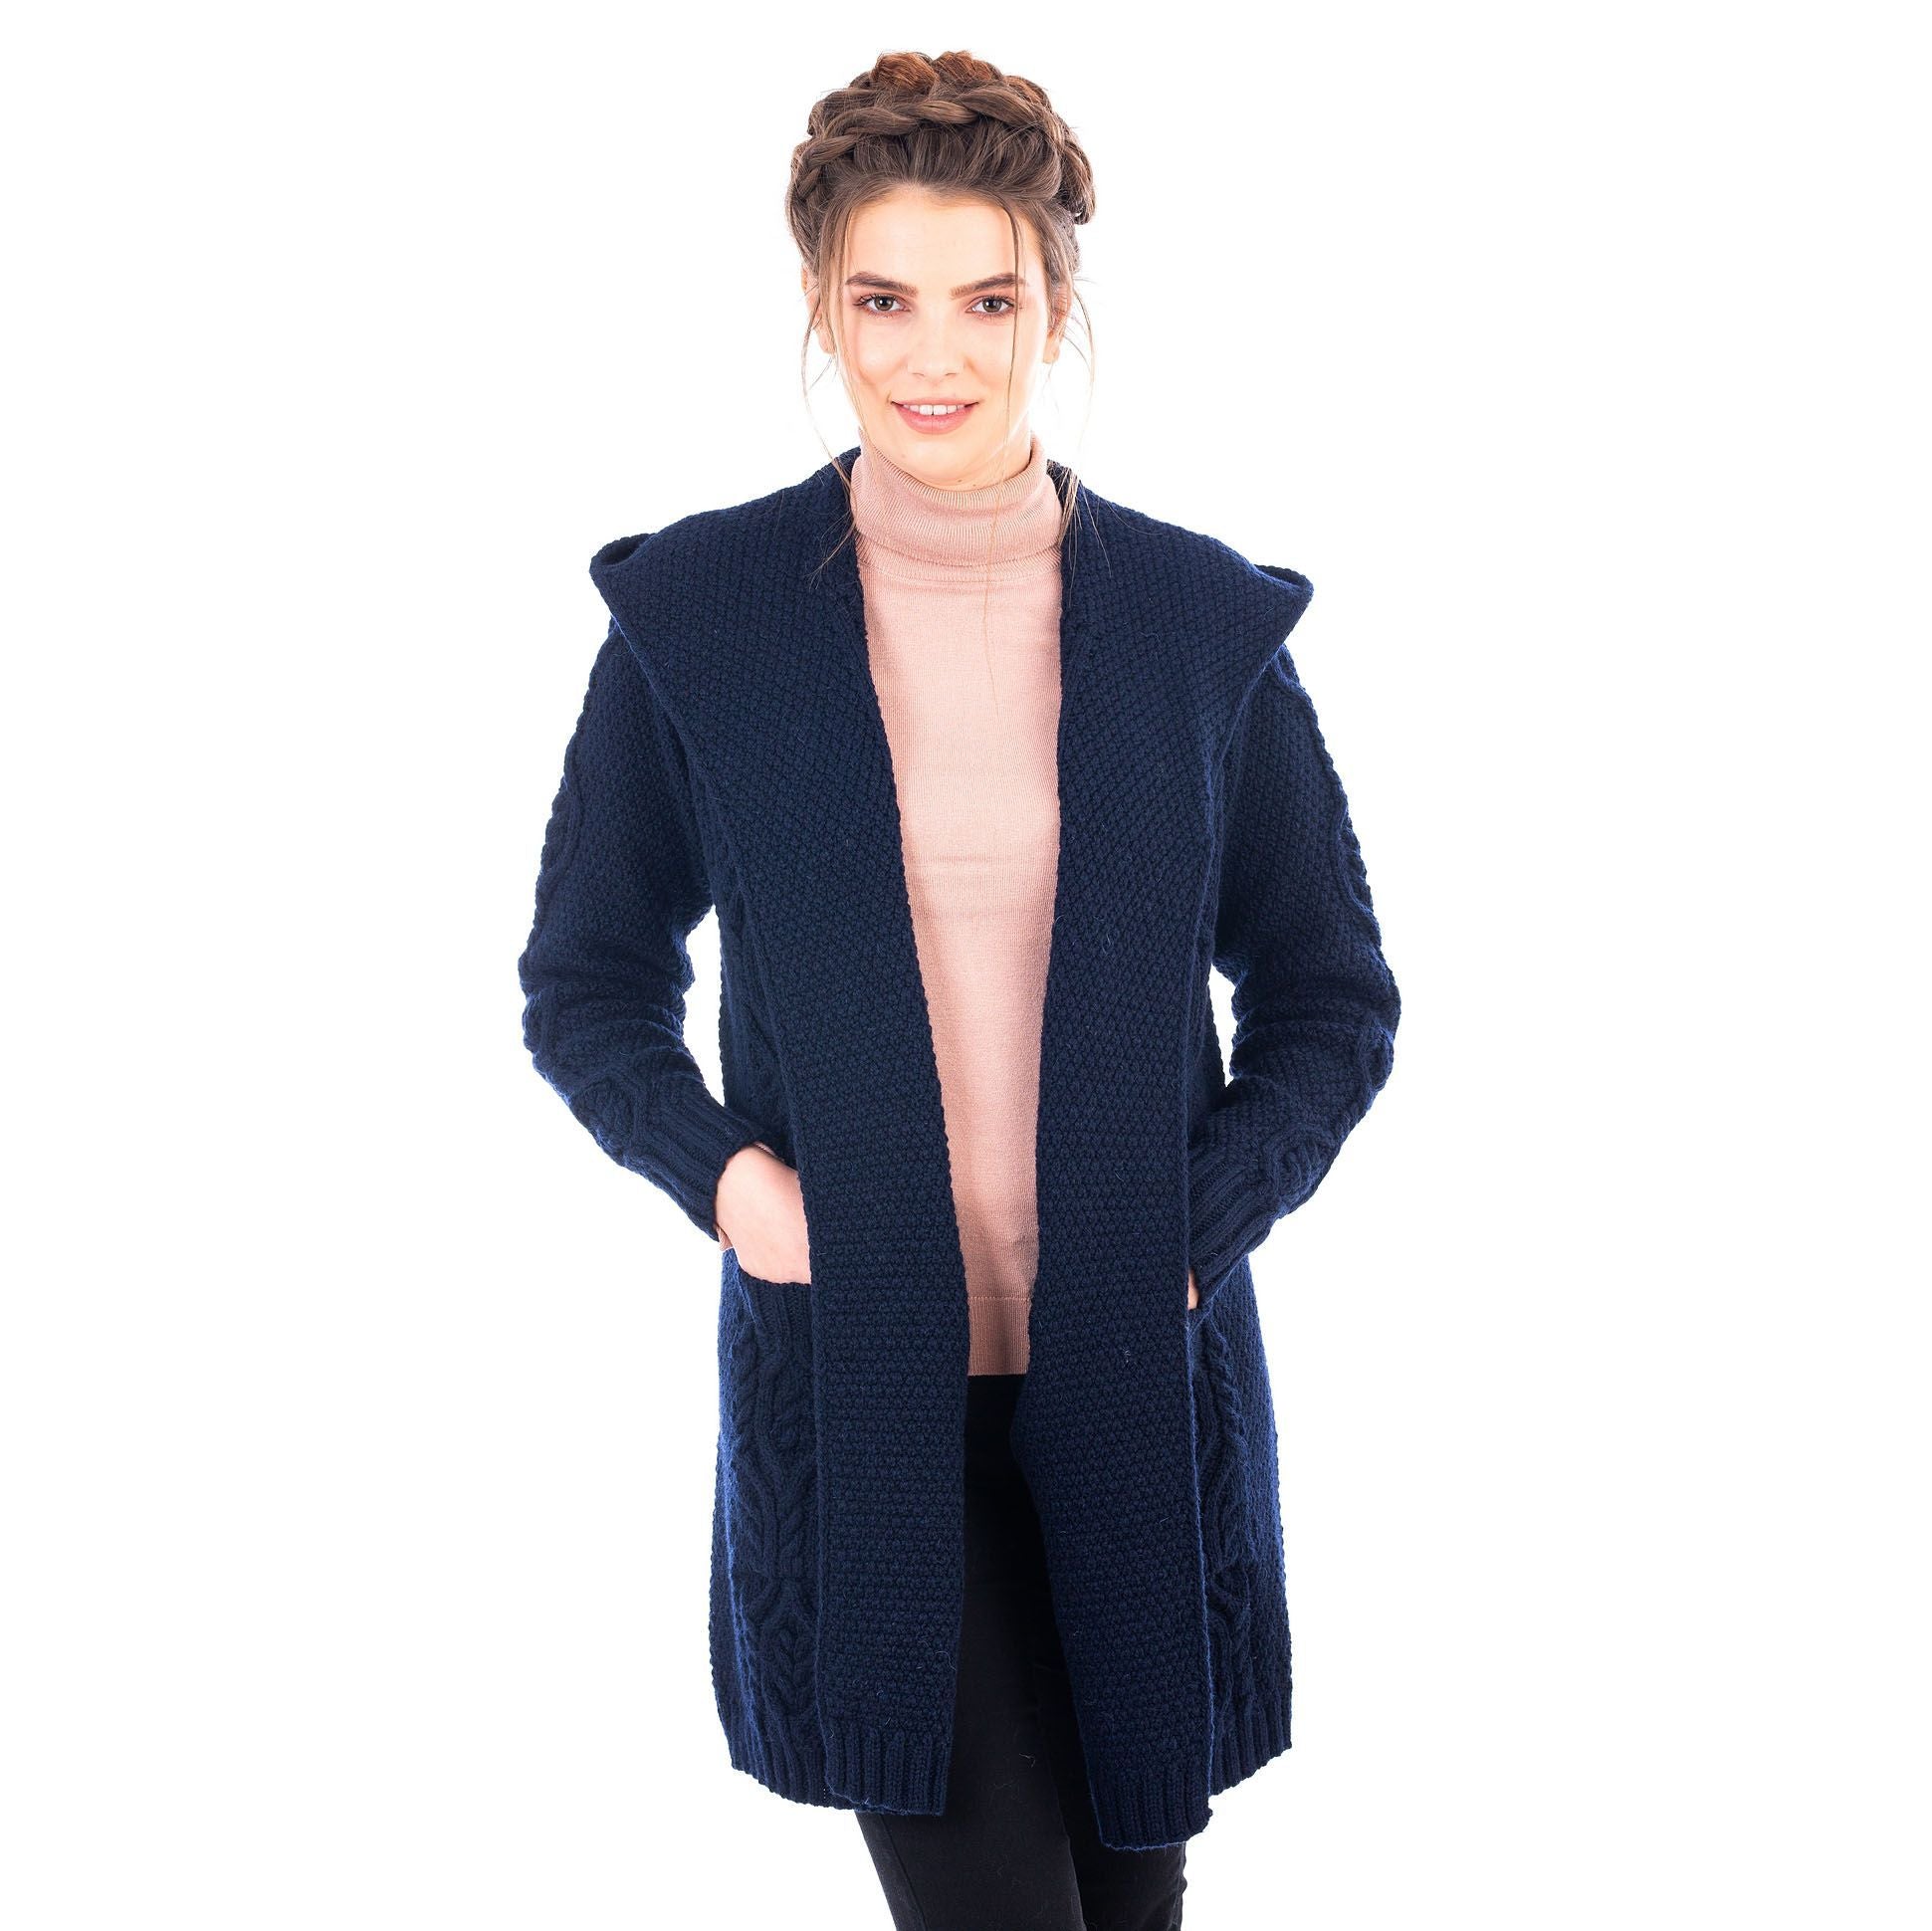 Ladies Classic Fit Long Cardigan with Hood Navy or Grey Made in Ireland - Olde Church Emporium